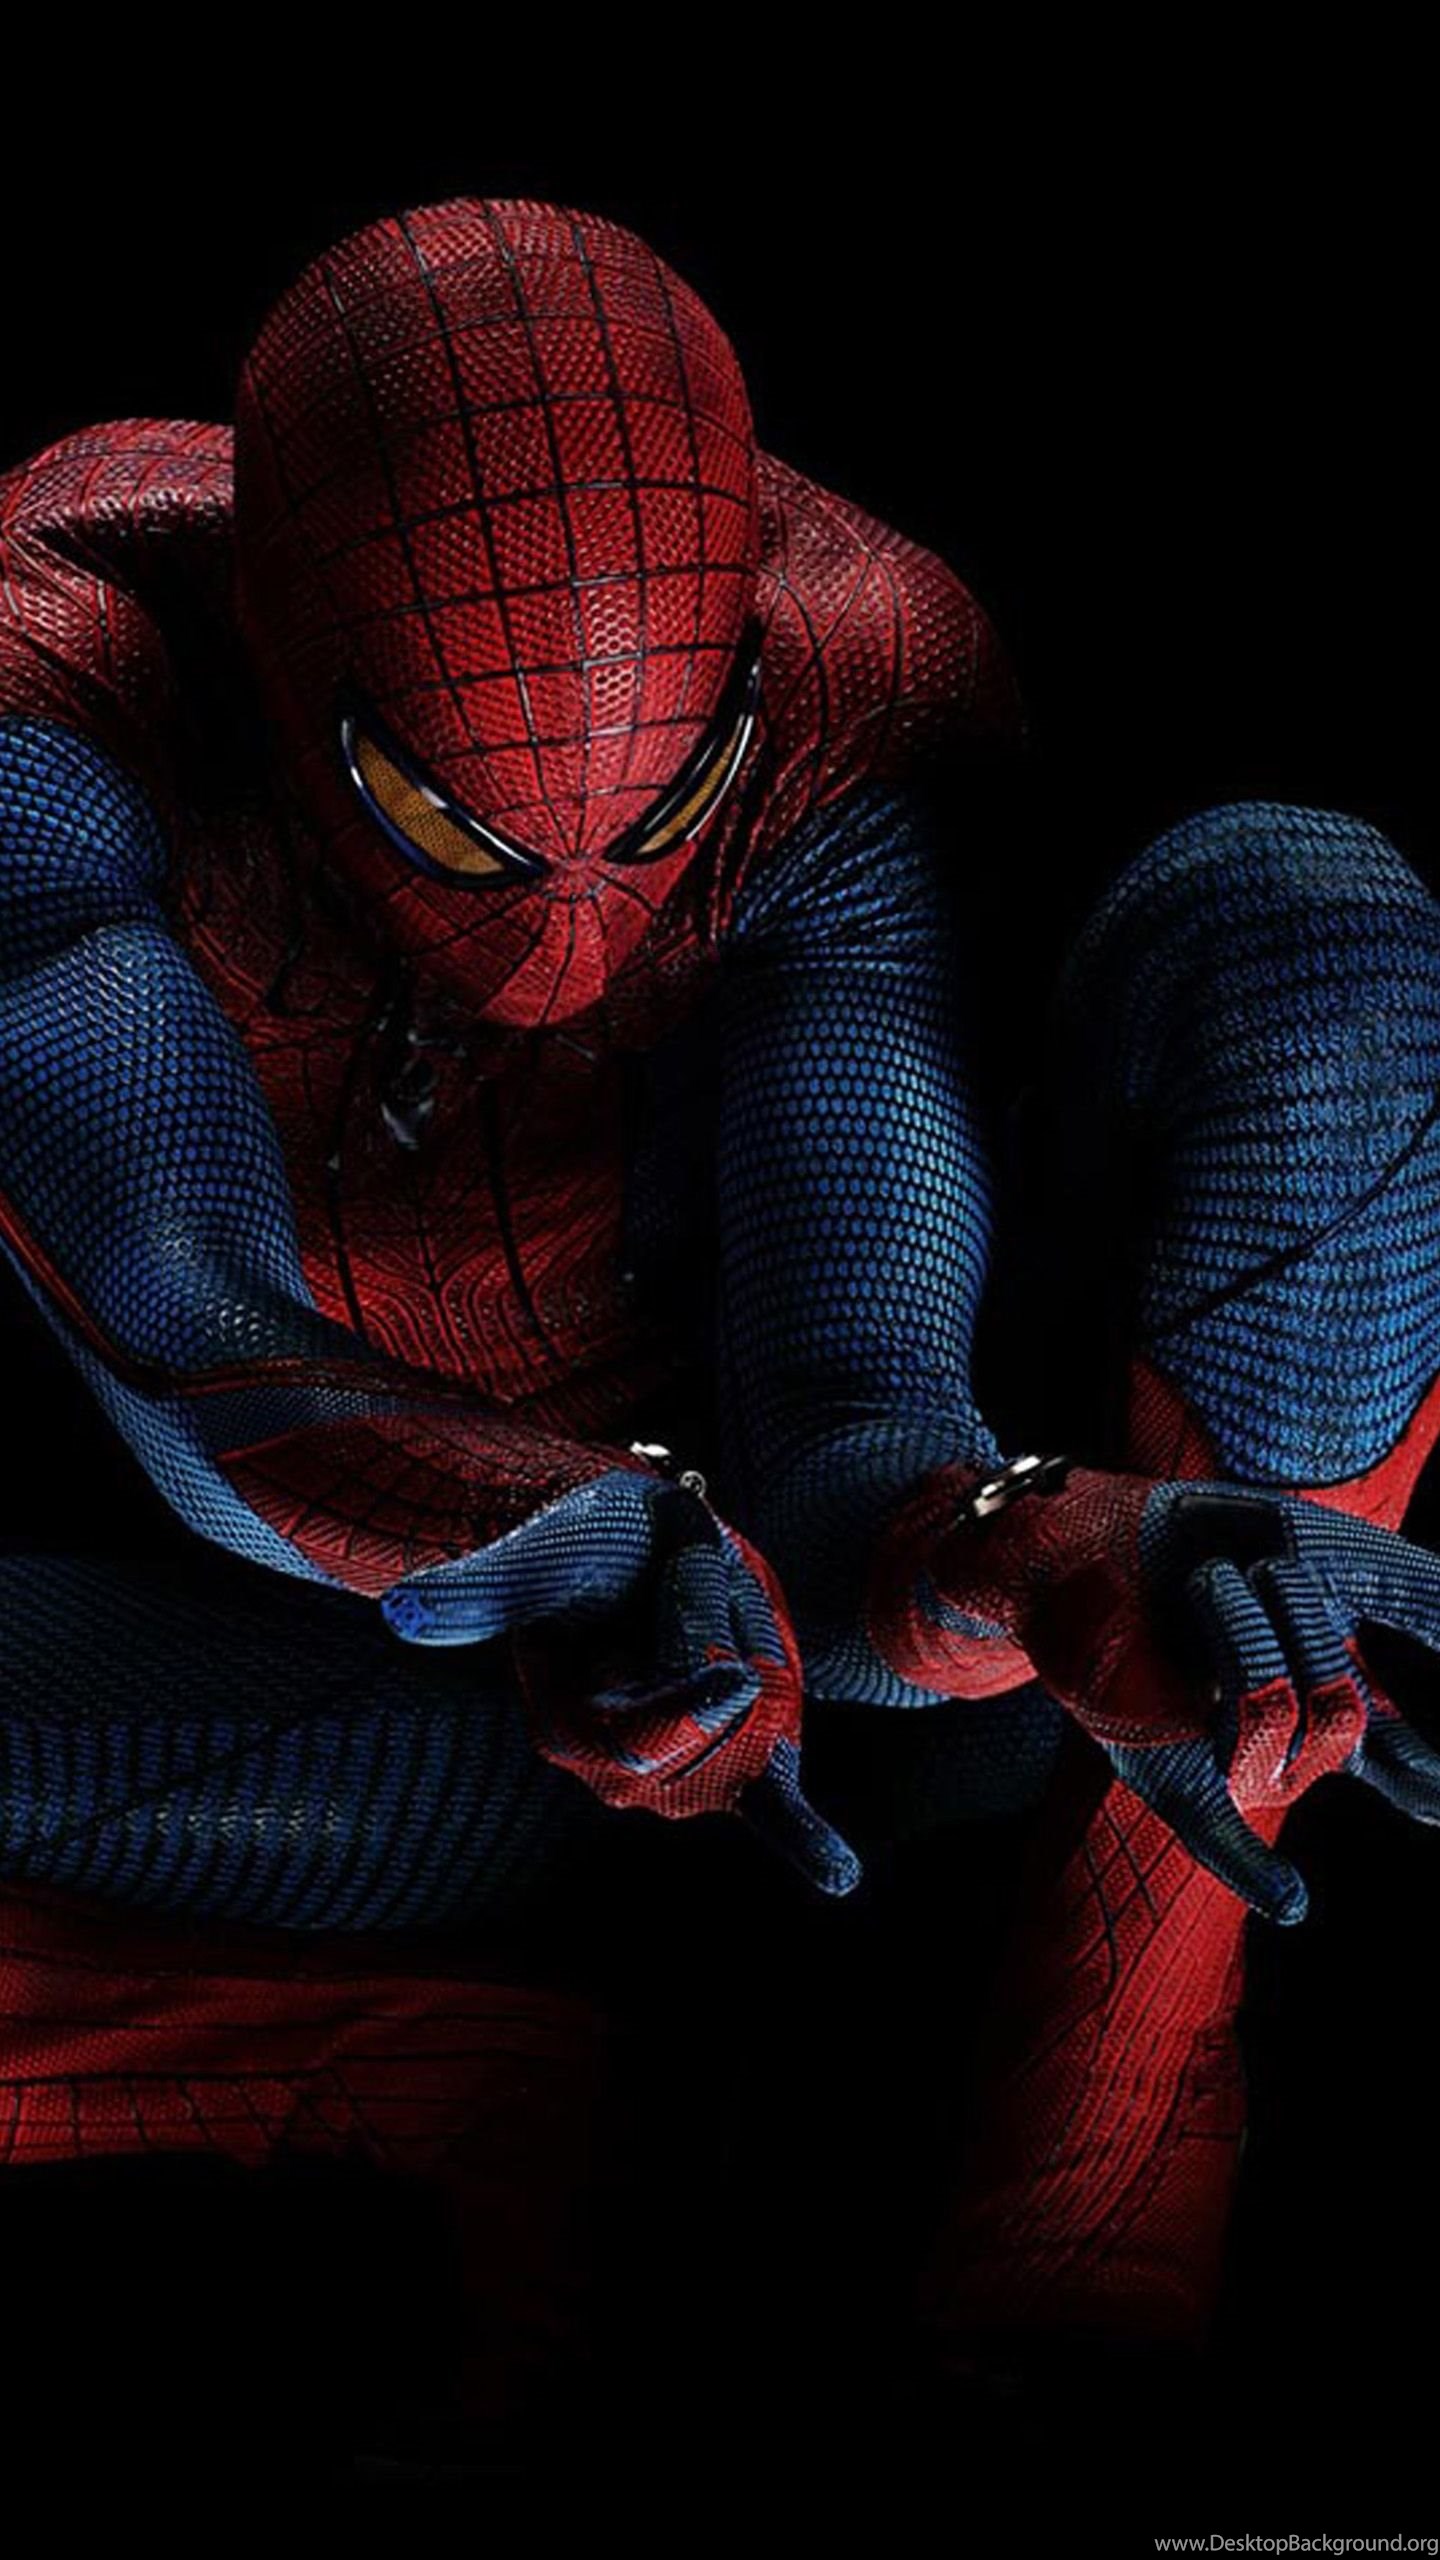 Resolution 1440x2560 Wallpaper 3d Spiderman Mobile Android Wallpapers Desktop Background